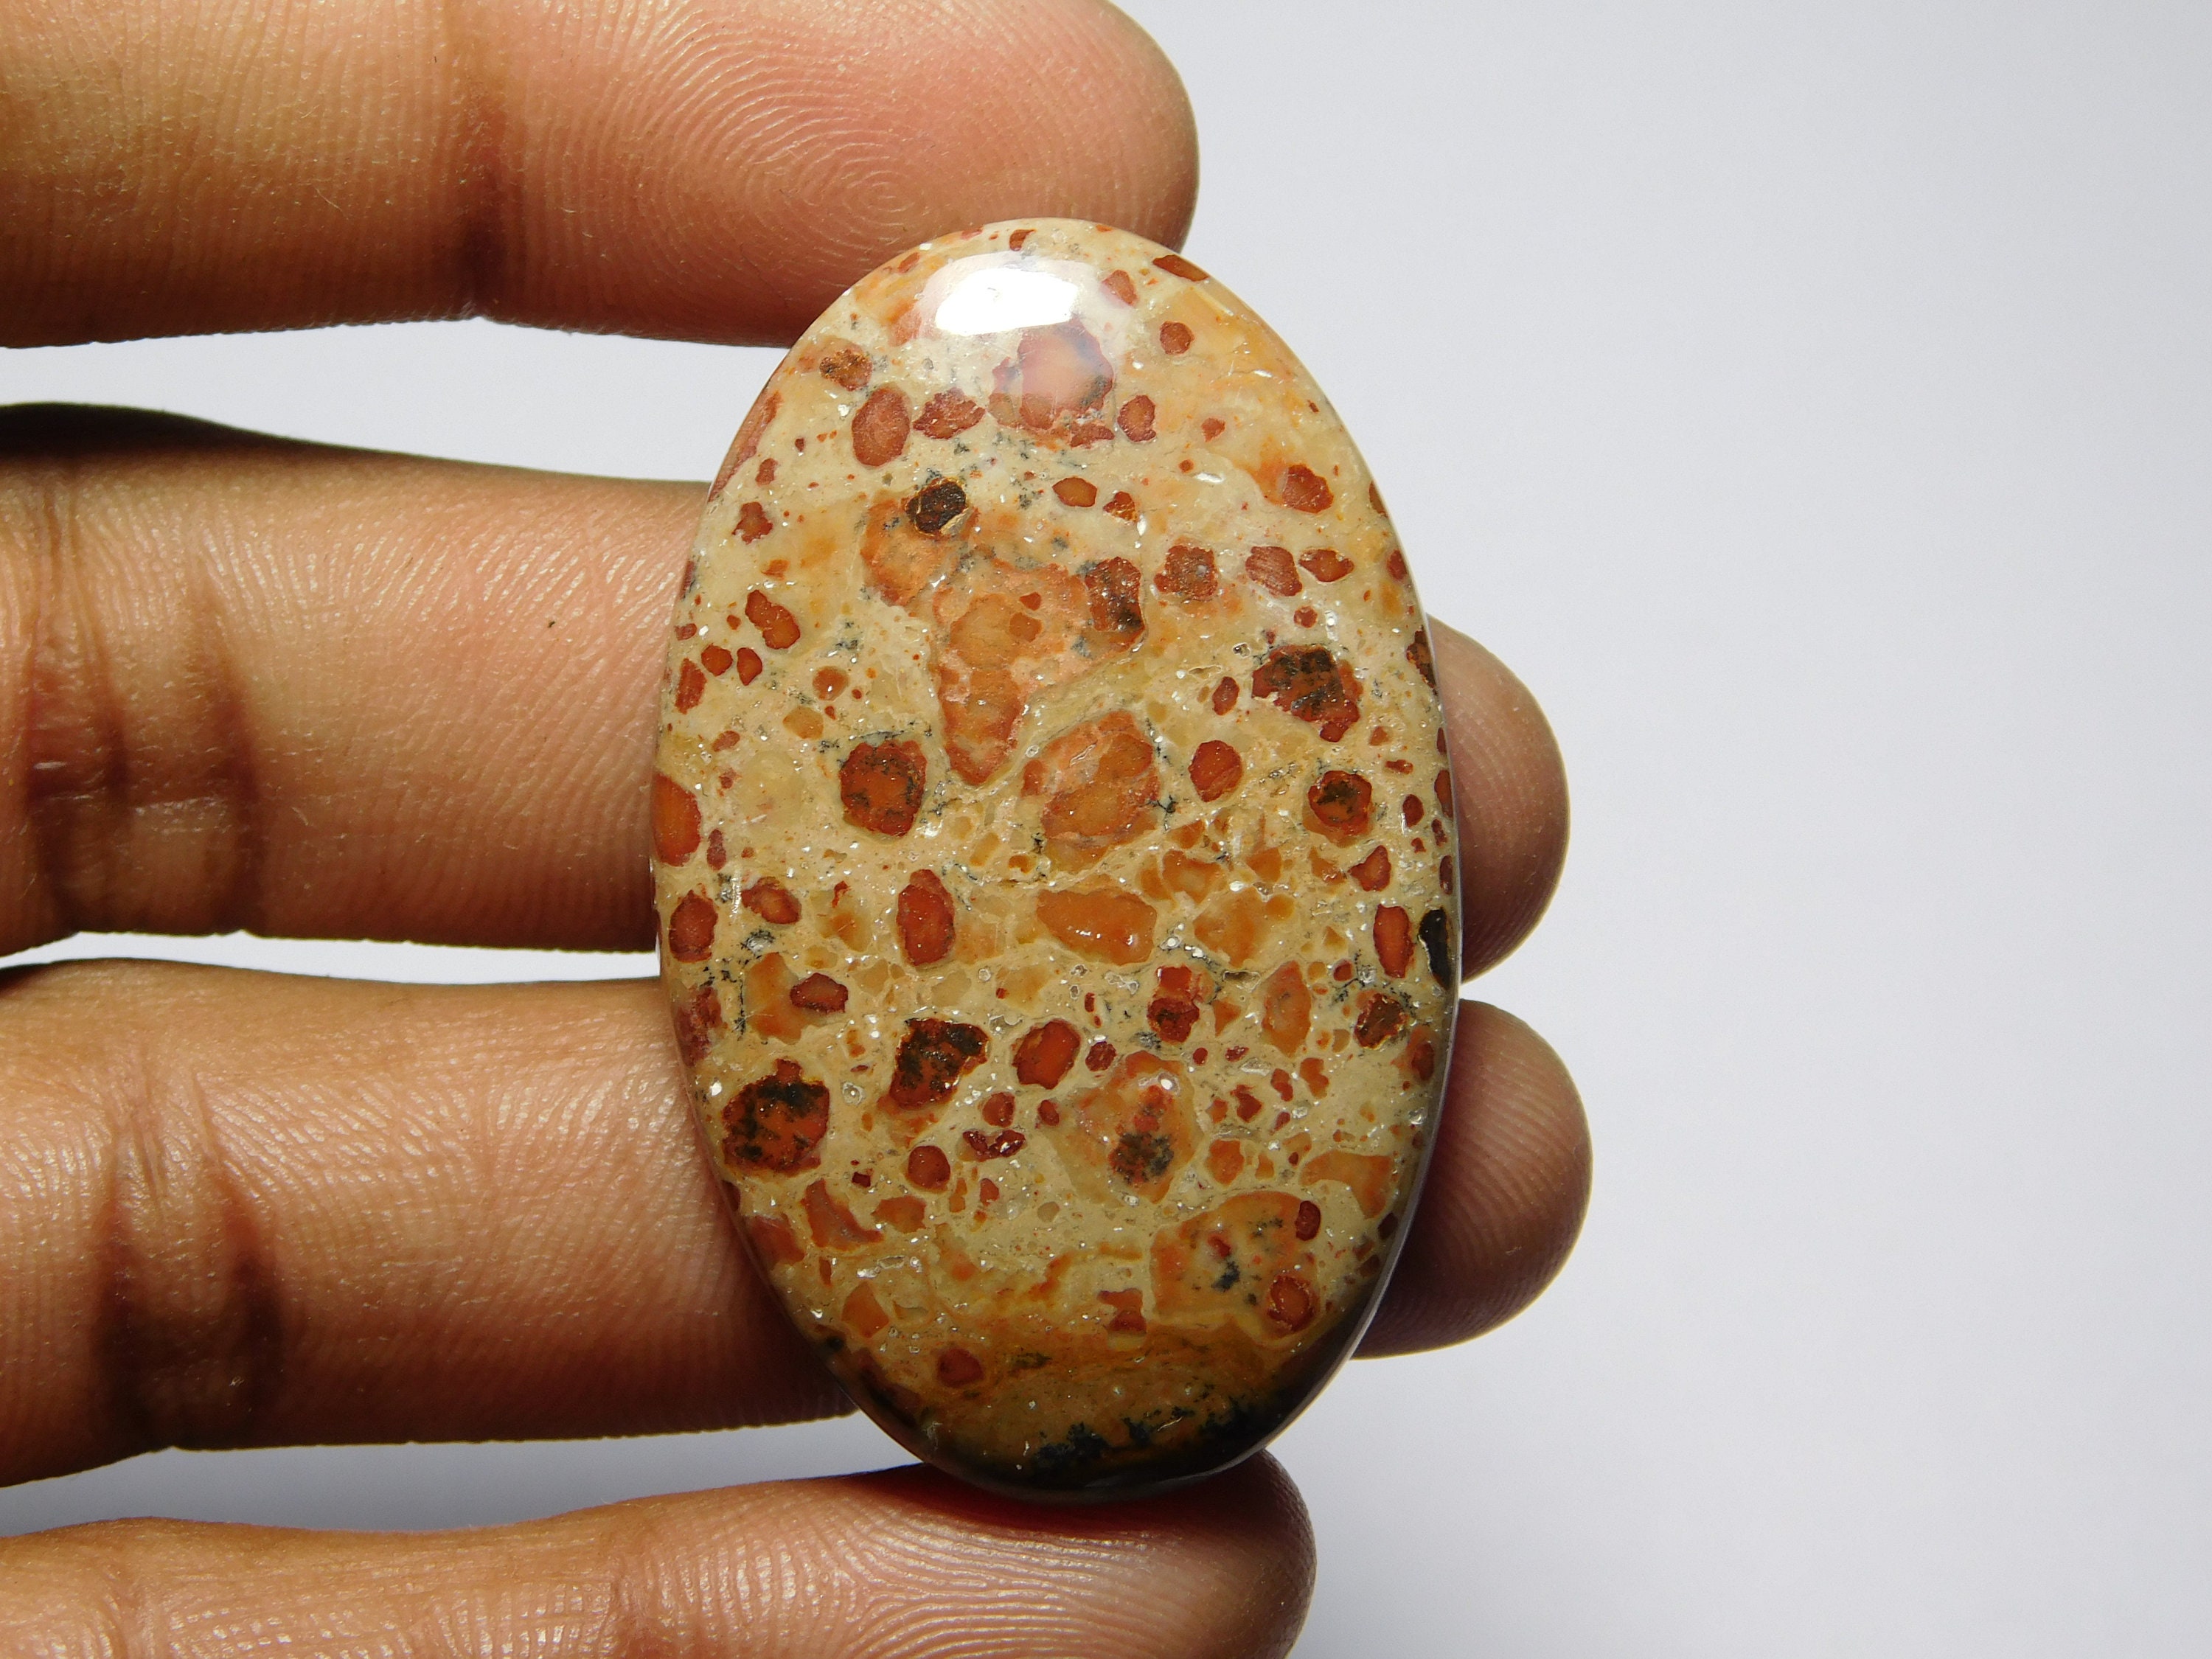 43X27MM Natural Asteroid Jasper Cabochon Asteroid Jasper Loose Gemstones Asteroid Jasper Loose semi pecious 59Cts.